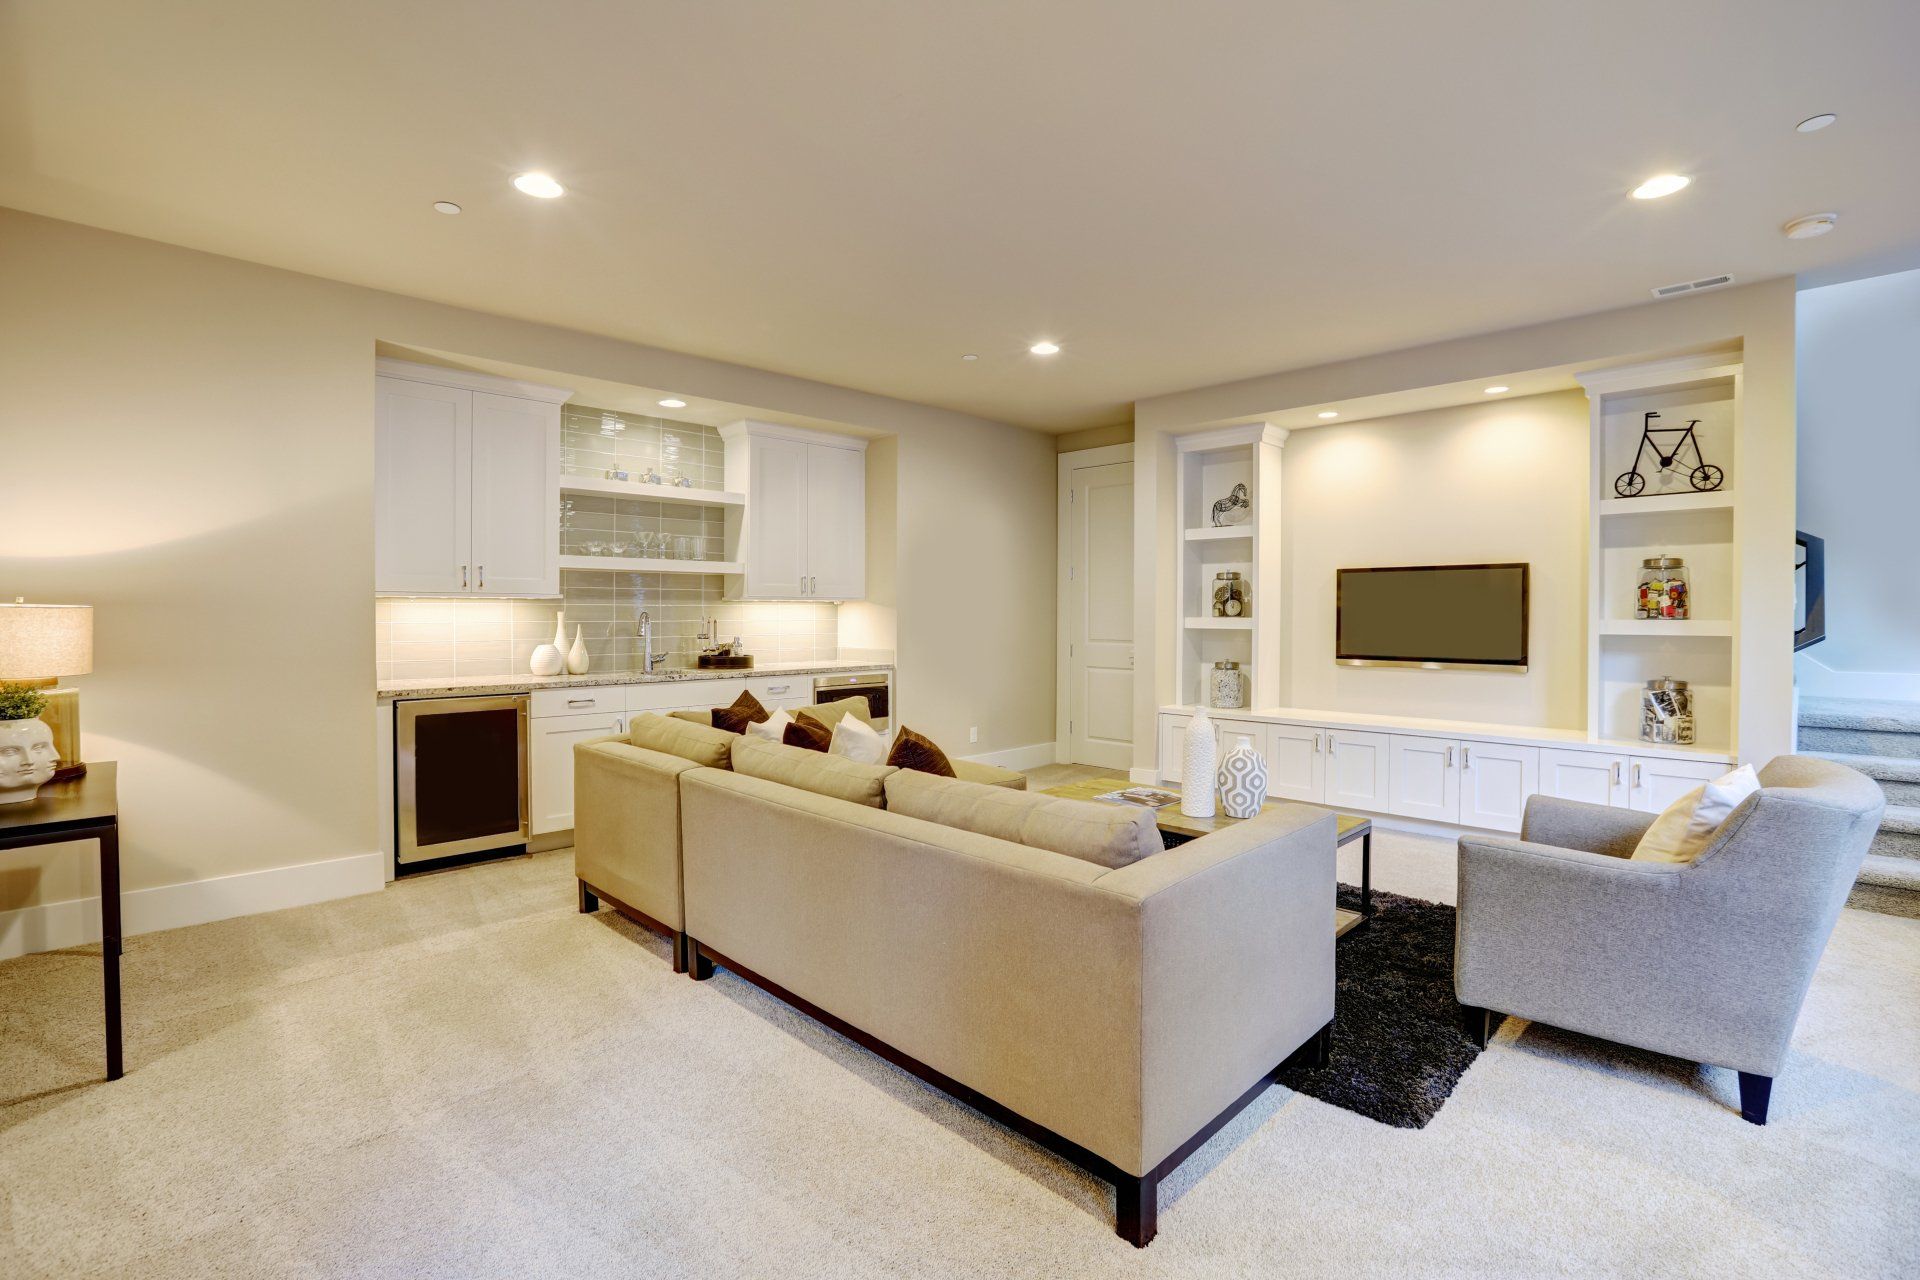 https://lirp.cdn-website.com/e6080714/dms3rep/multi/opt/stock-photo-chic-basement-features-a-gray-sectional-facing-a-white-built-in-tv-cabinet-and-wet-bar-mounted-to-a-555354661-1920w.jpg